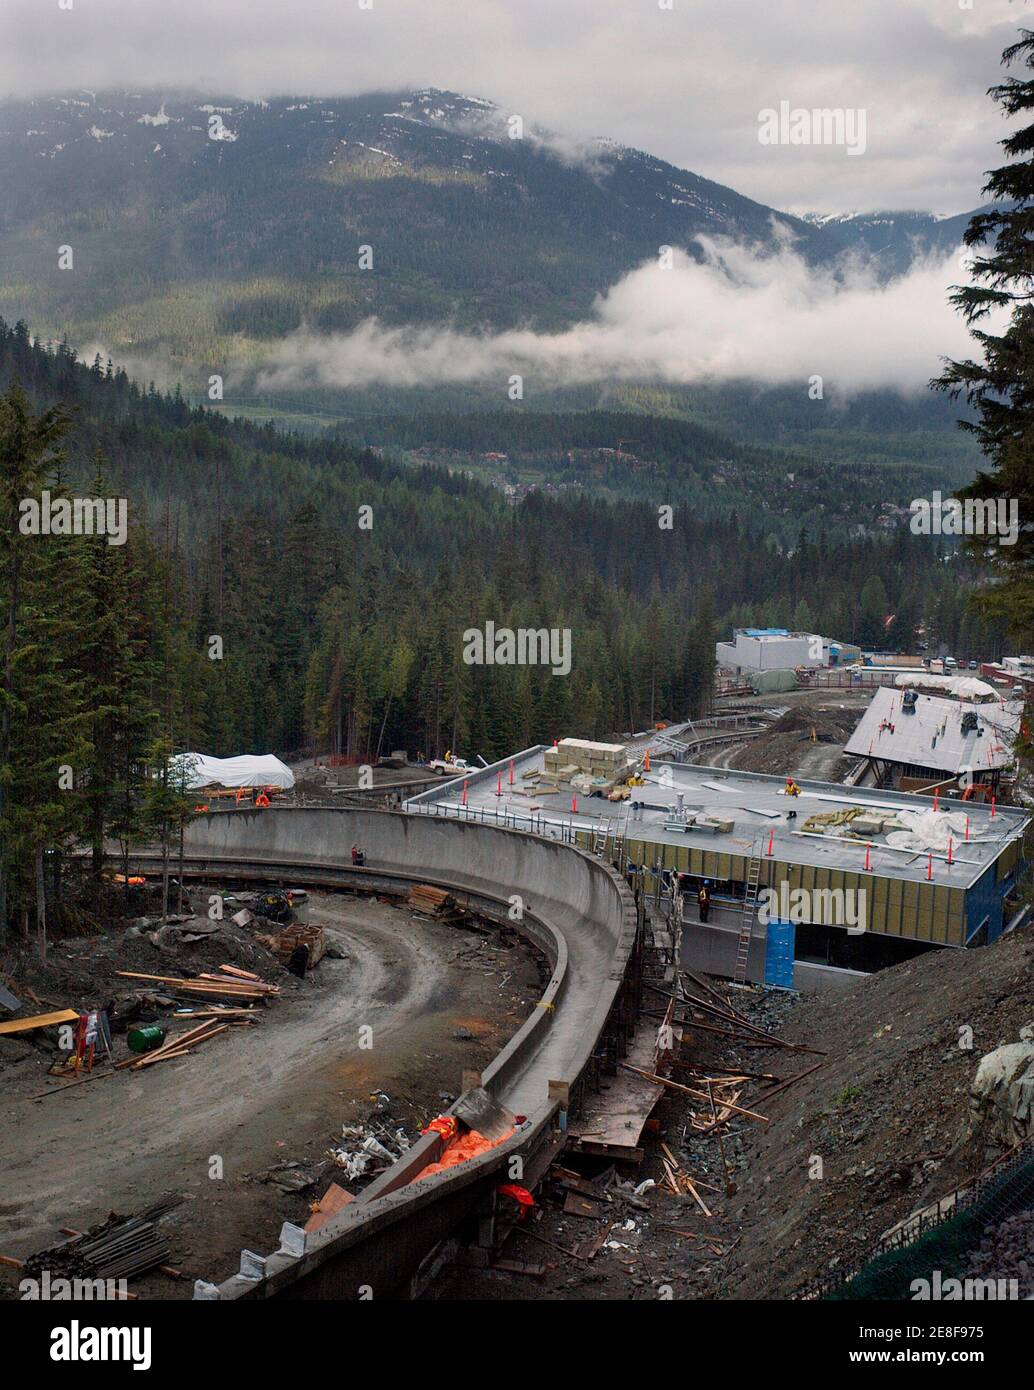 The site for the bobsleigh, luge and skeleton track for the the 2010 Olympic Winter Games is shown under construction in Whistler, British Columbia June 13, 2007.       REUTERS/Andy Clark        (CANADA) Stock Photo